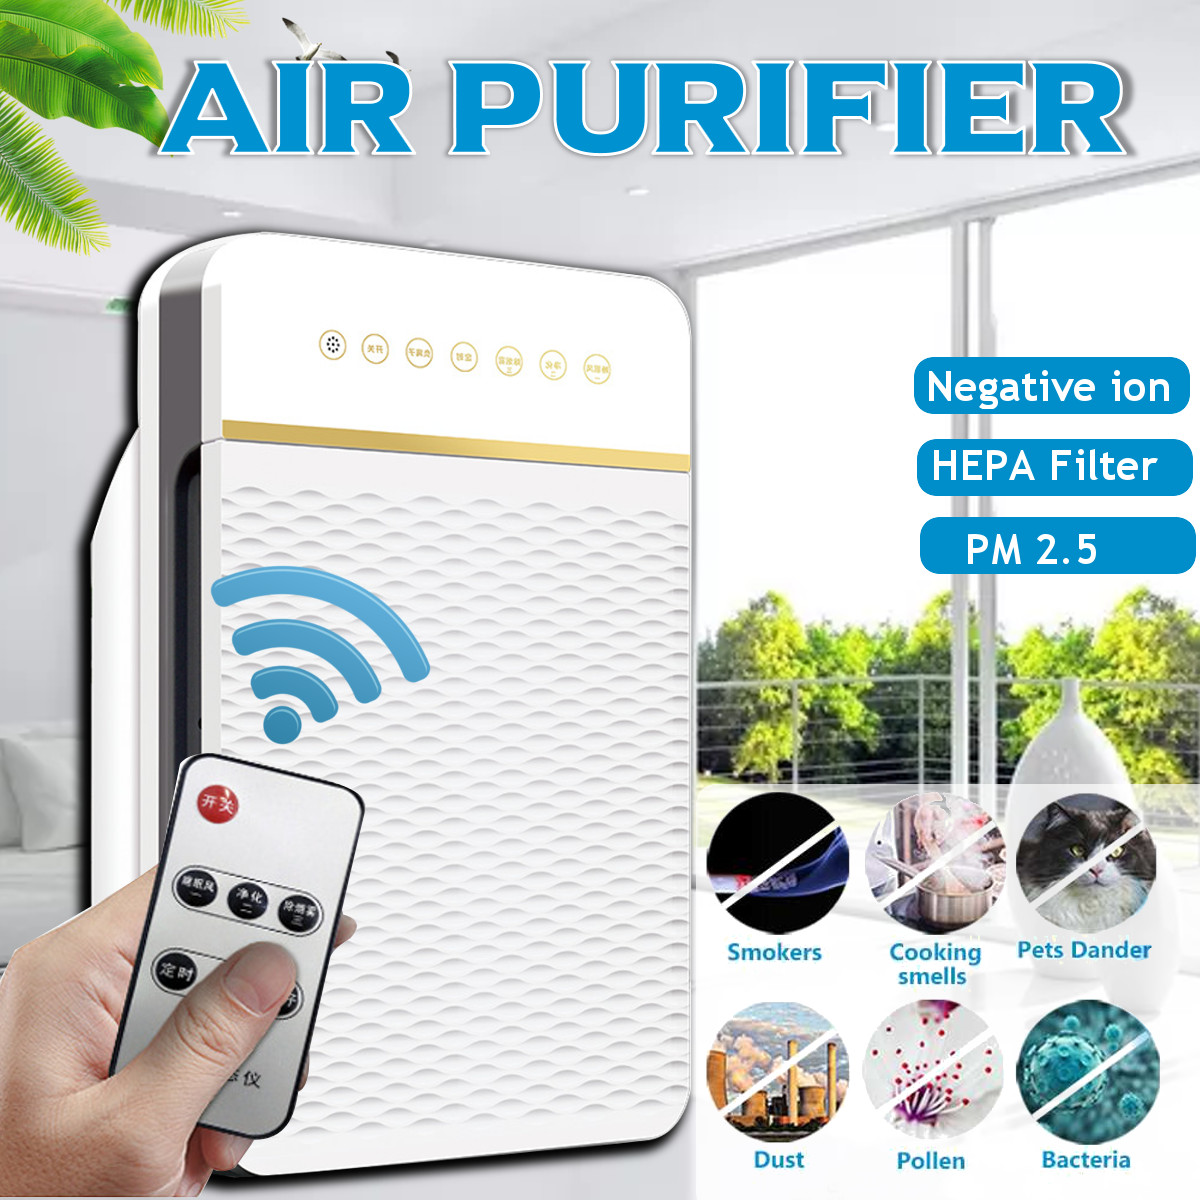 Air-Purifier-650msup3H-HEPA-Filter-Home-Germ-Smoke-Dust-Cleaner-w-Remote-Control-Air-Filter-Air-Clea-1631975-1